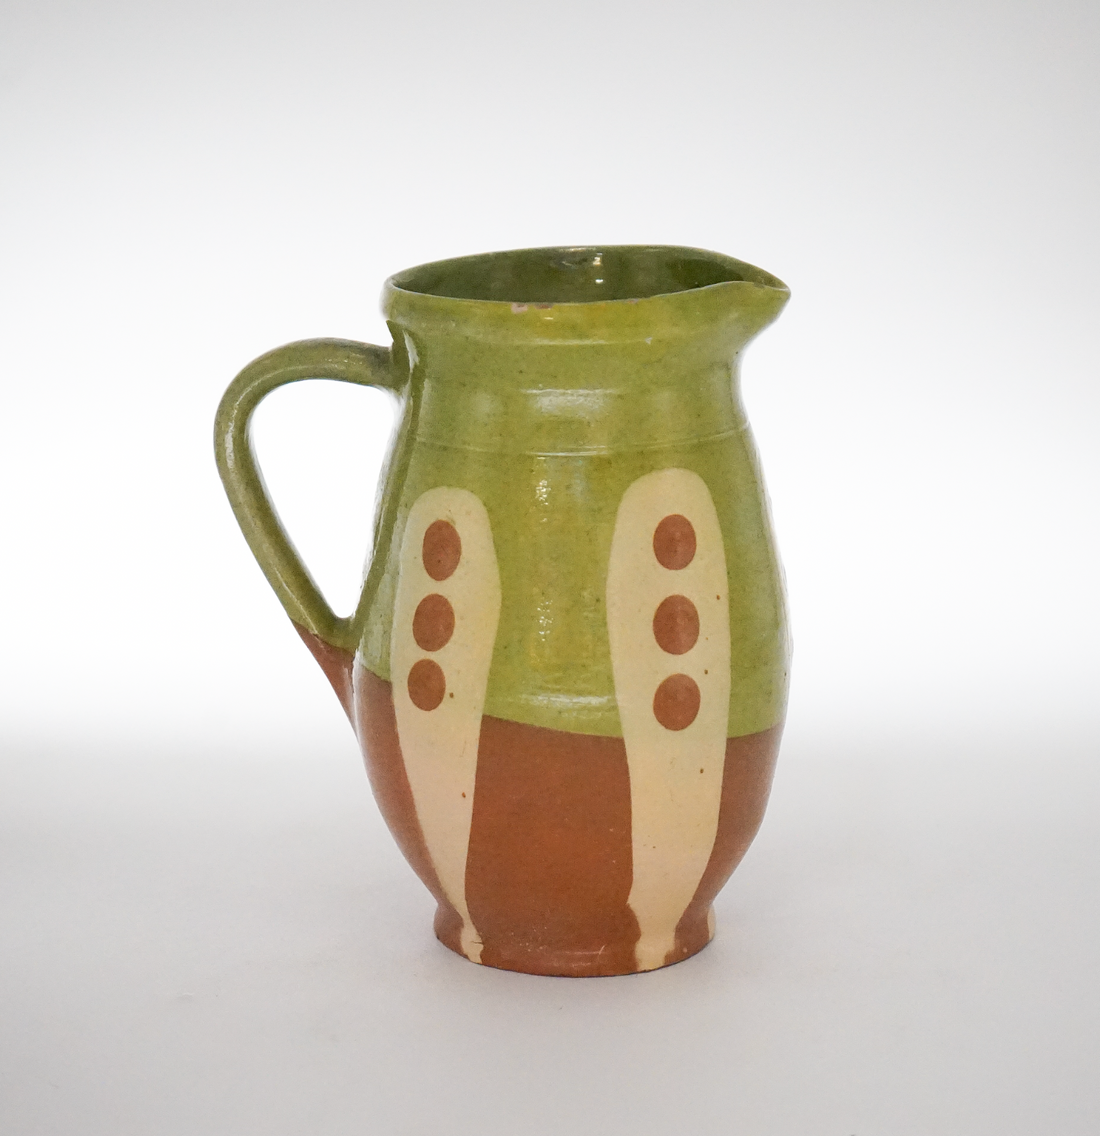 25. Hand Painted Antique Hungarian Pitcher